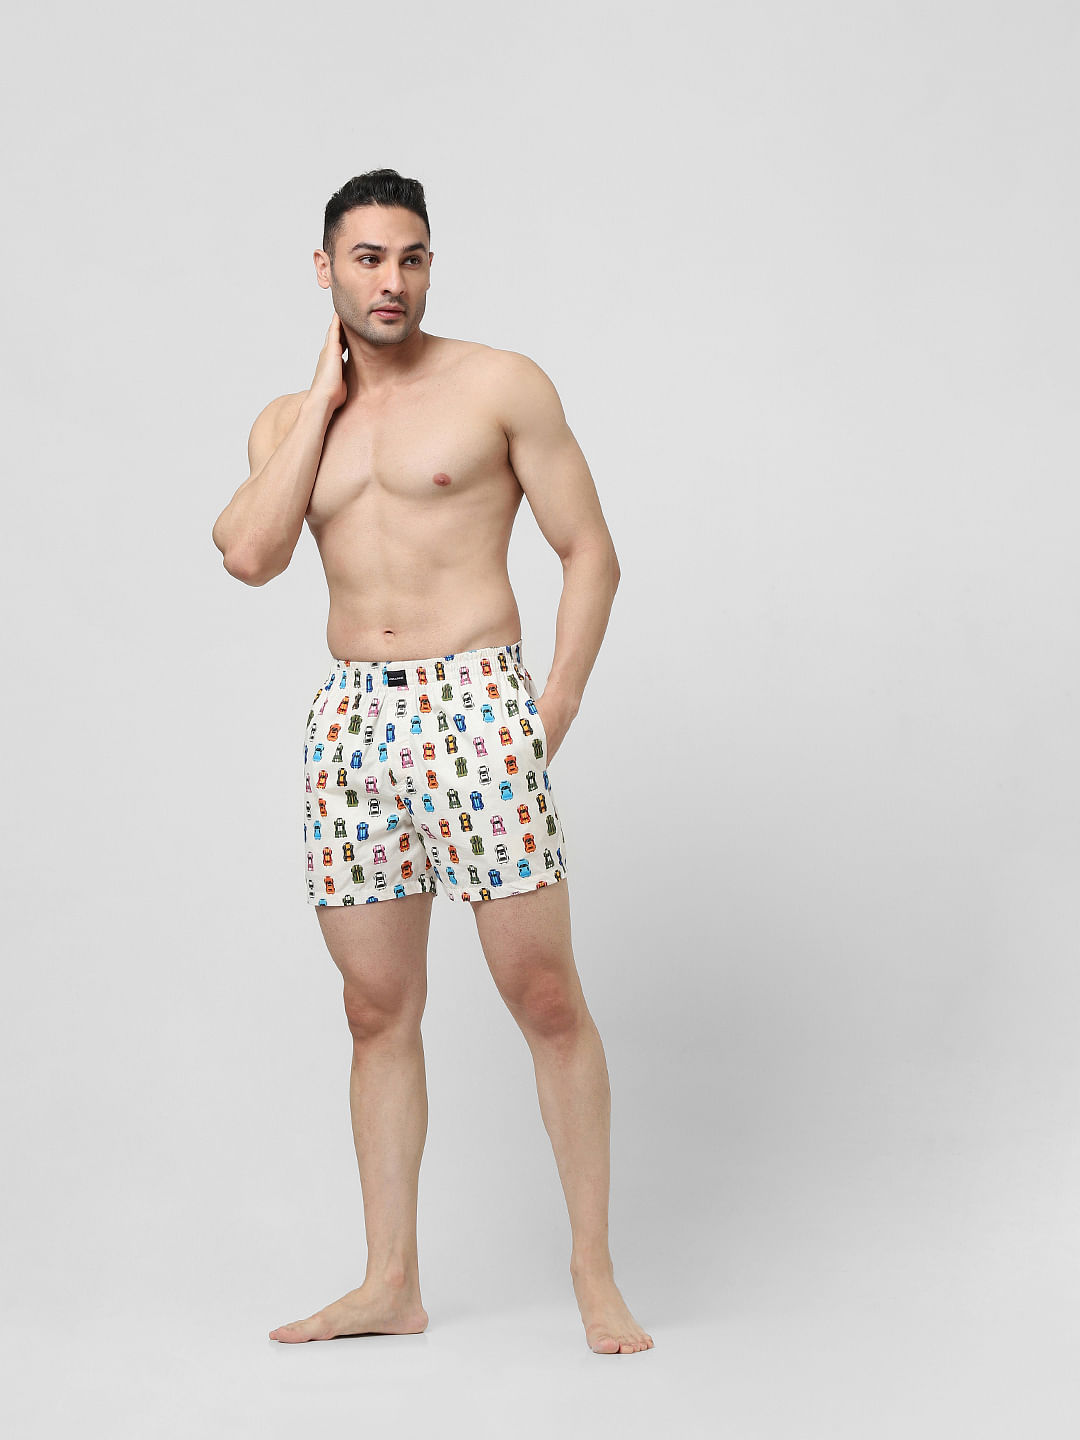 Mens allday boxer shorts for complete comfort  Freecultr